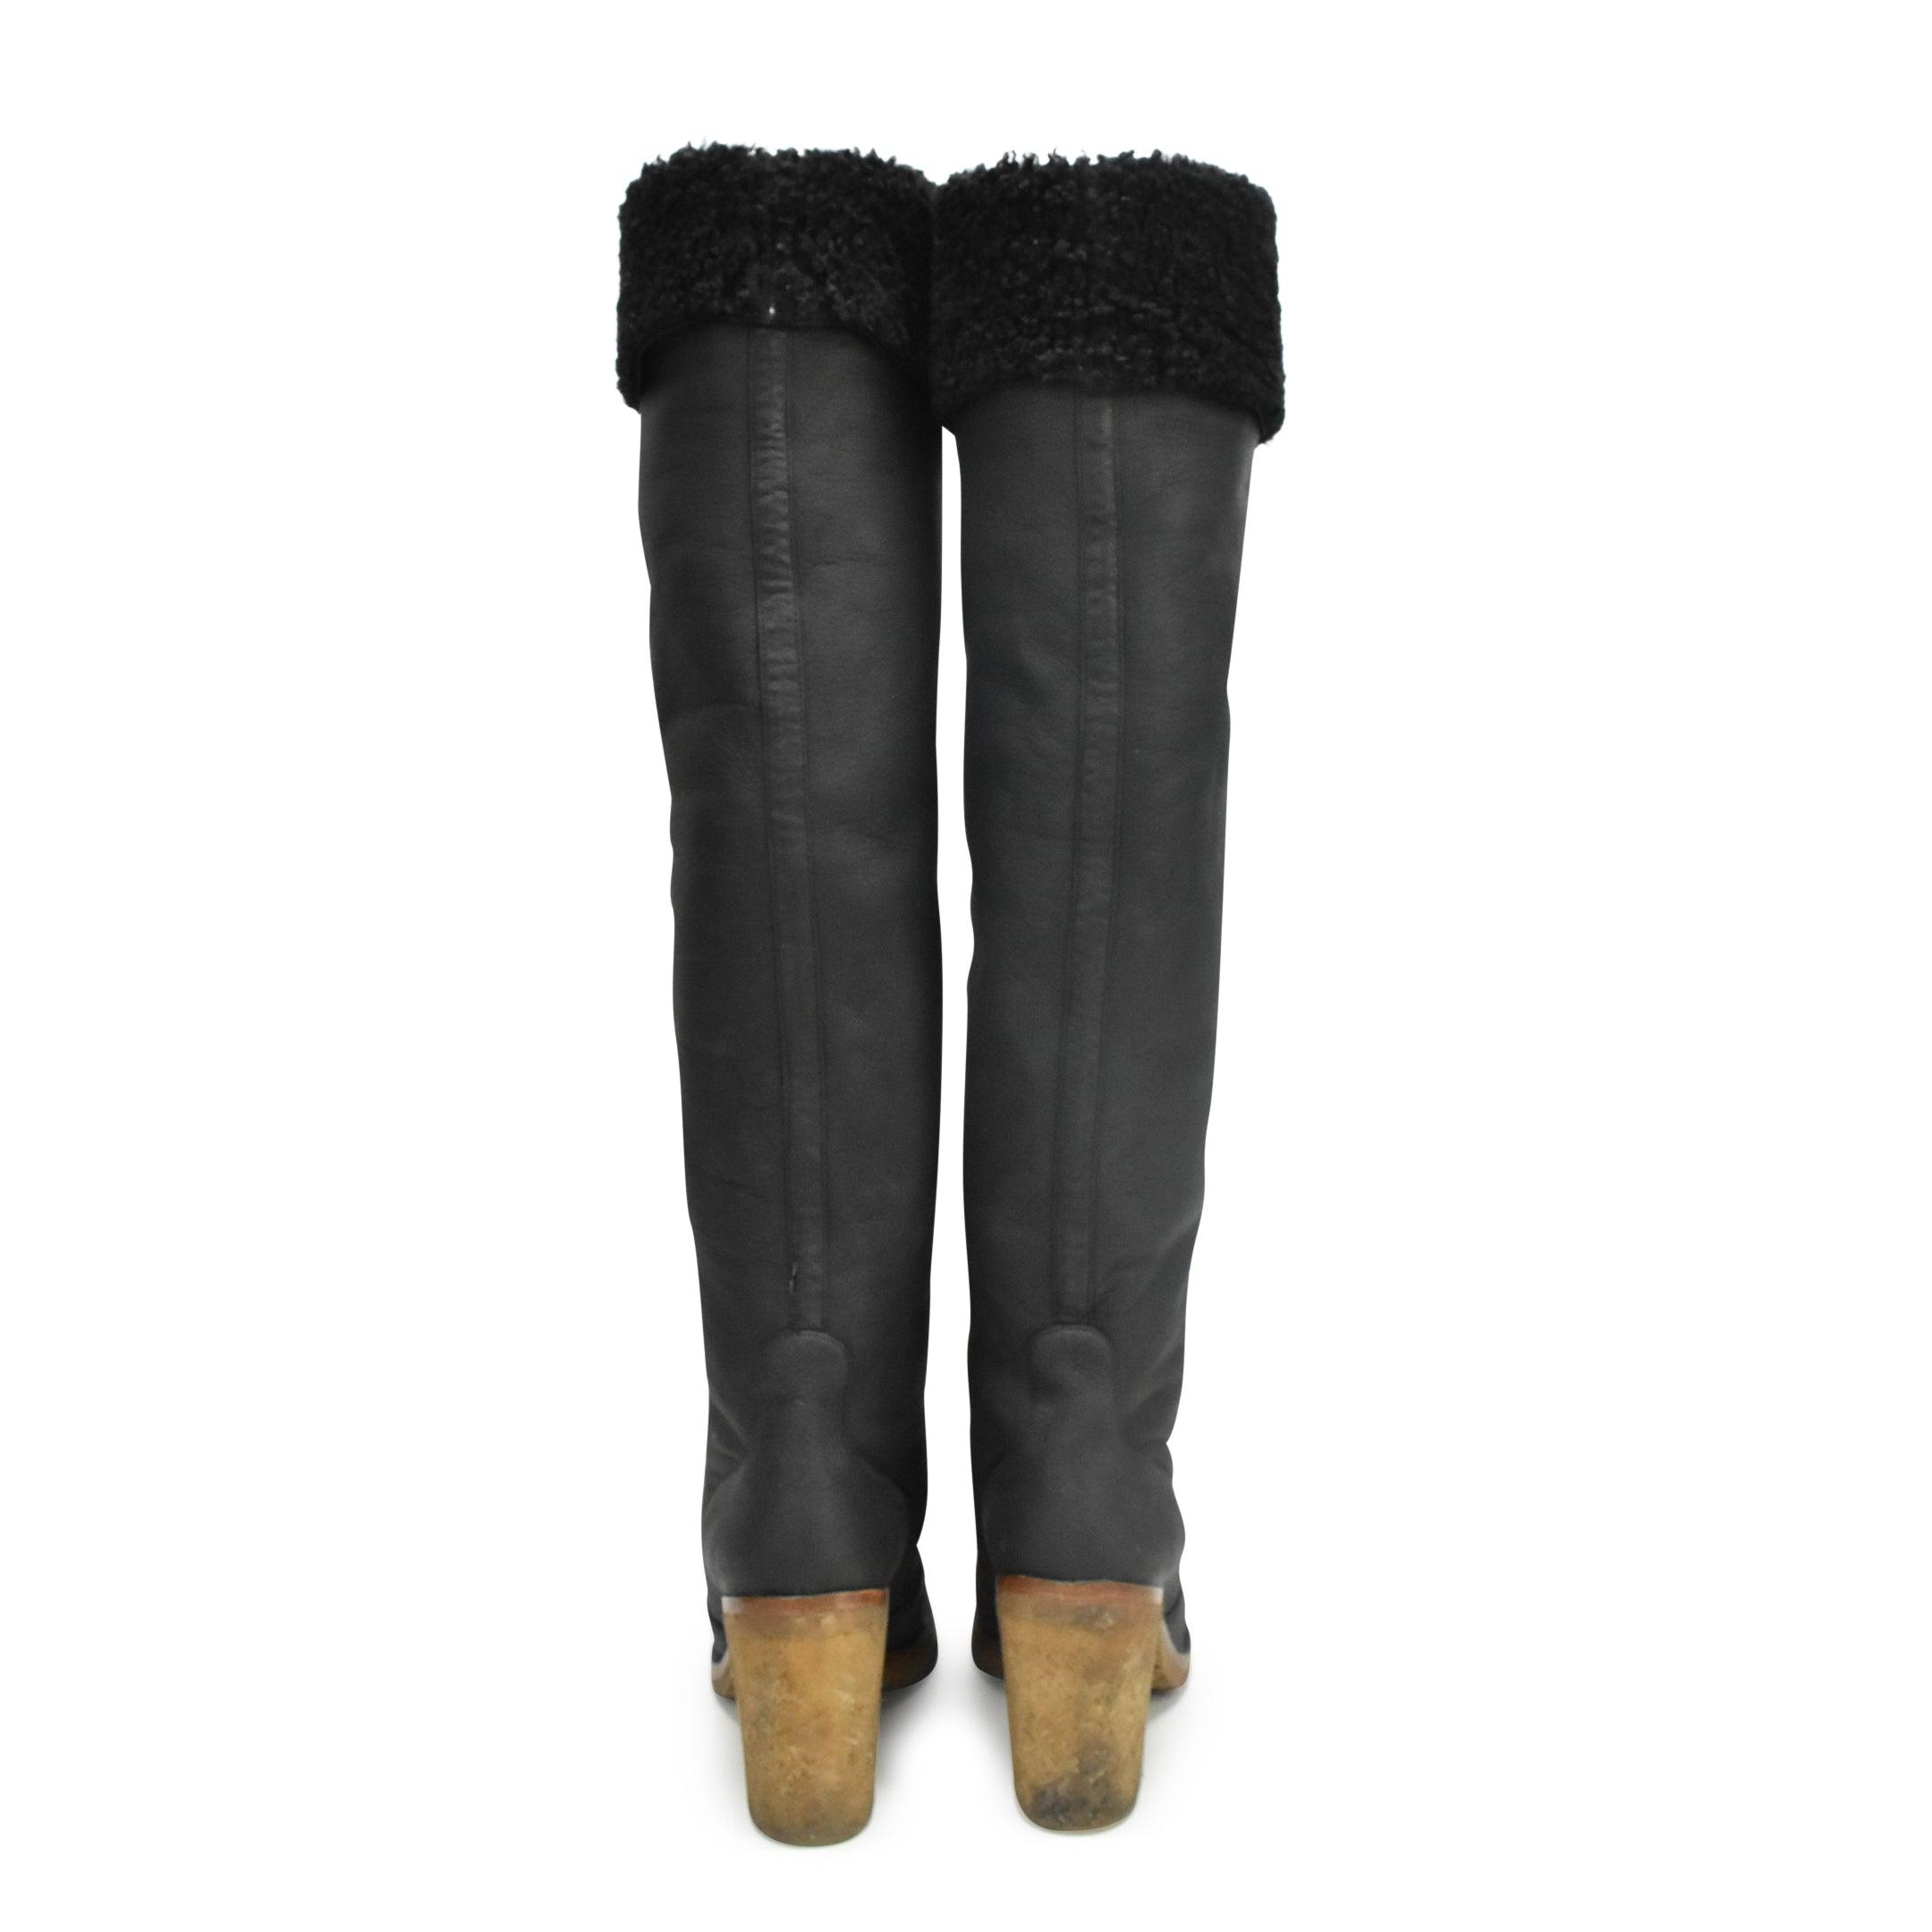 Chanel Shearling Boots - Women's 40 - Fashionably Yours